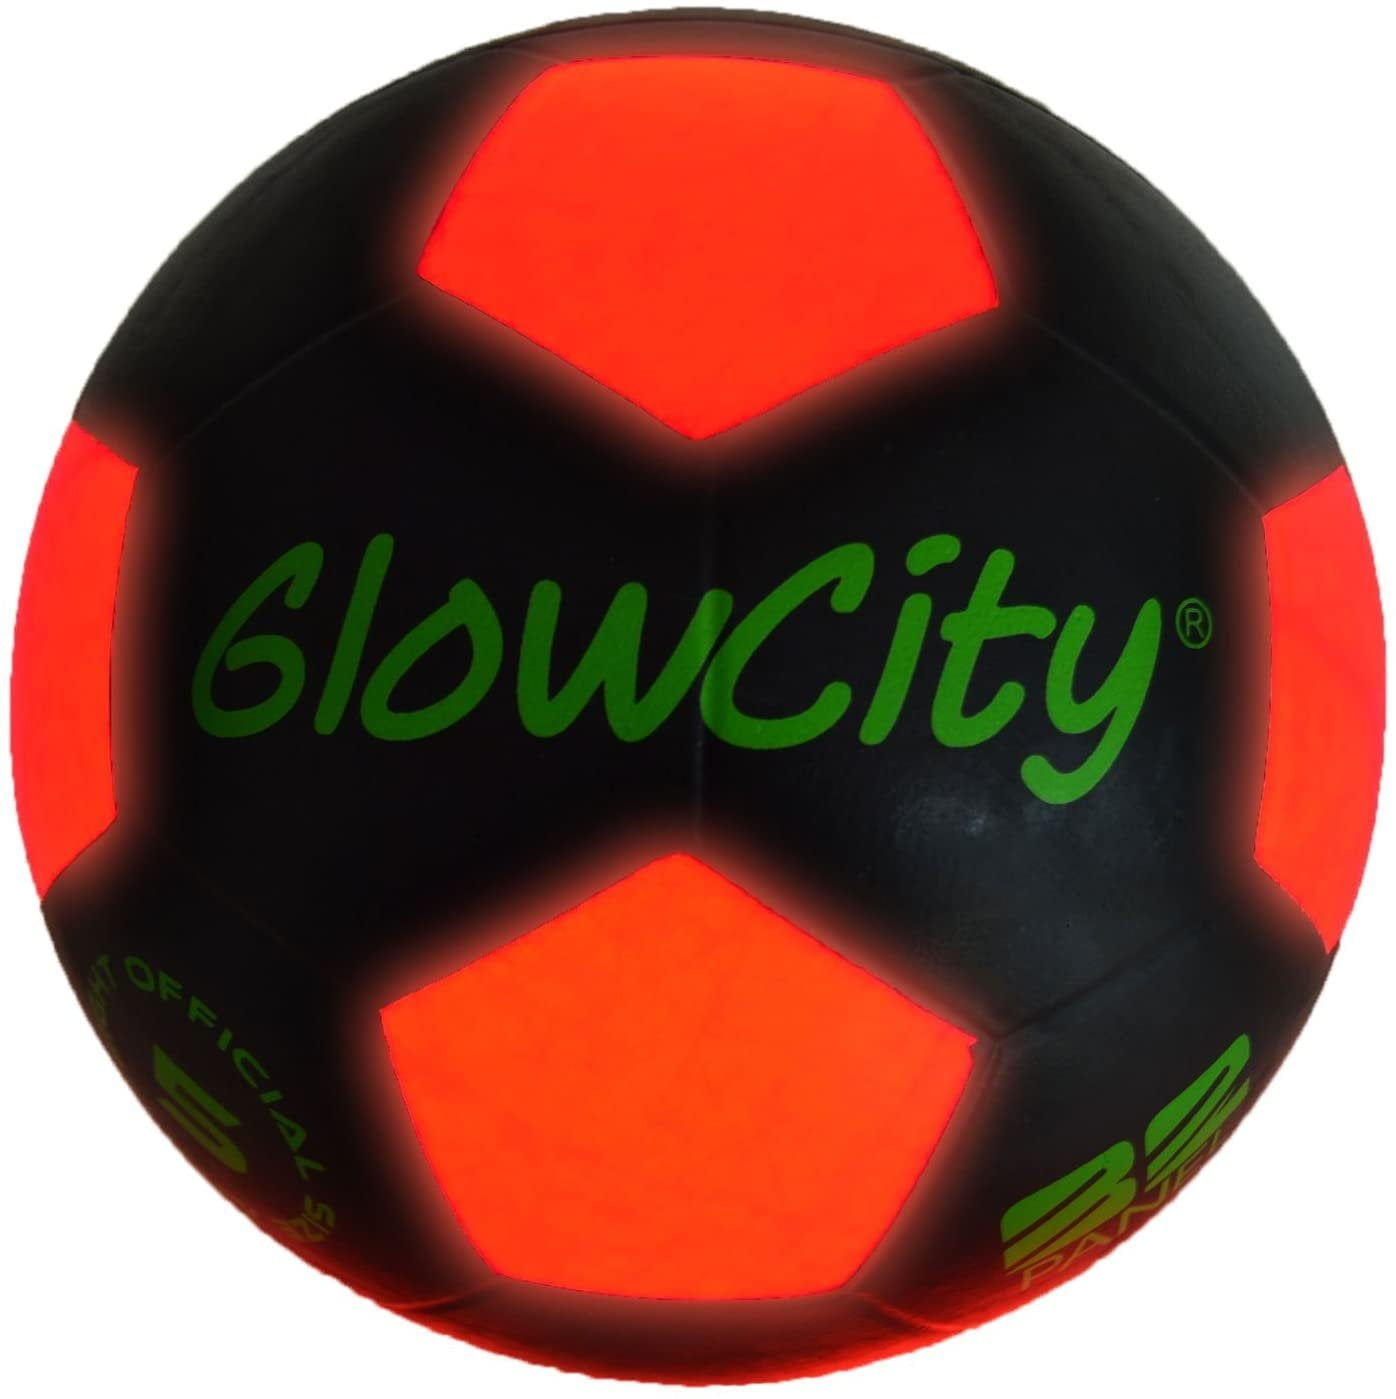 Light Up GlowCity Glow in The Dark Football Official Size Footballs for Kids, 